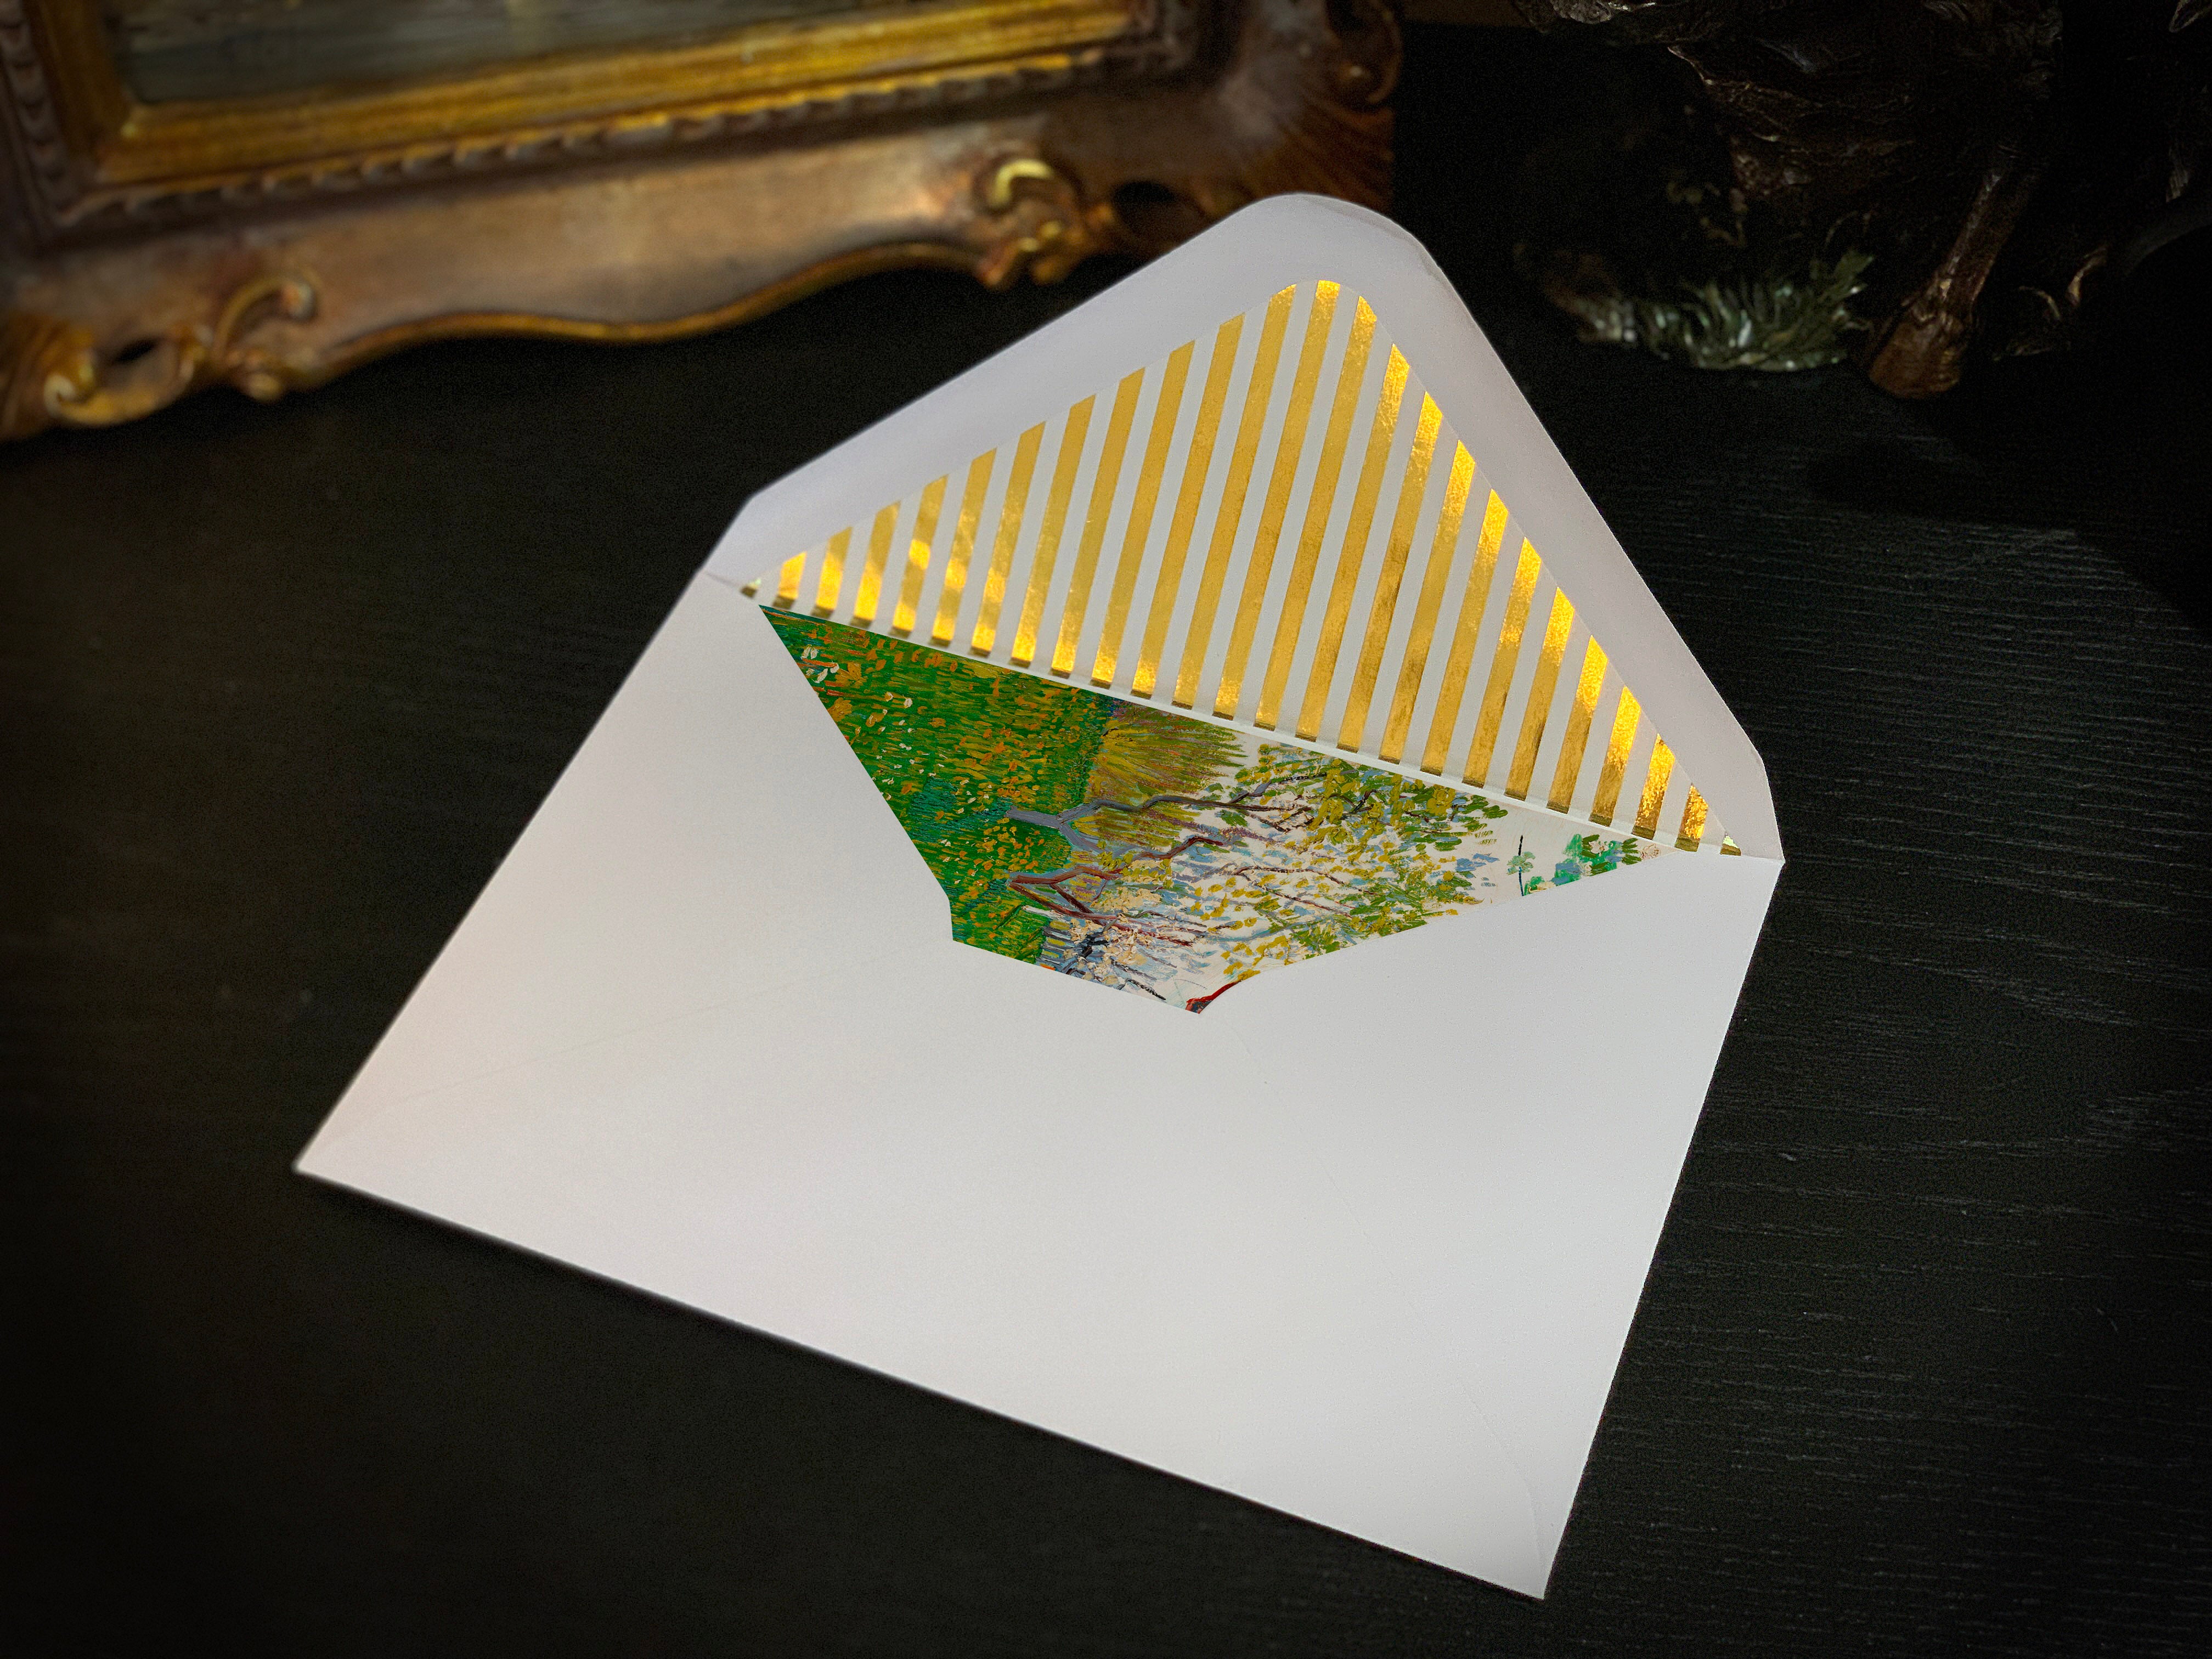 Van Gogh Countryside, Everyday Fine Art Greeting Cards with Elegant Striped Gold Foil Envelopes, 5in x 7in, 5 Cards/5 Envelopes